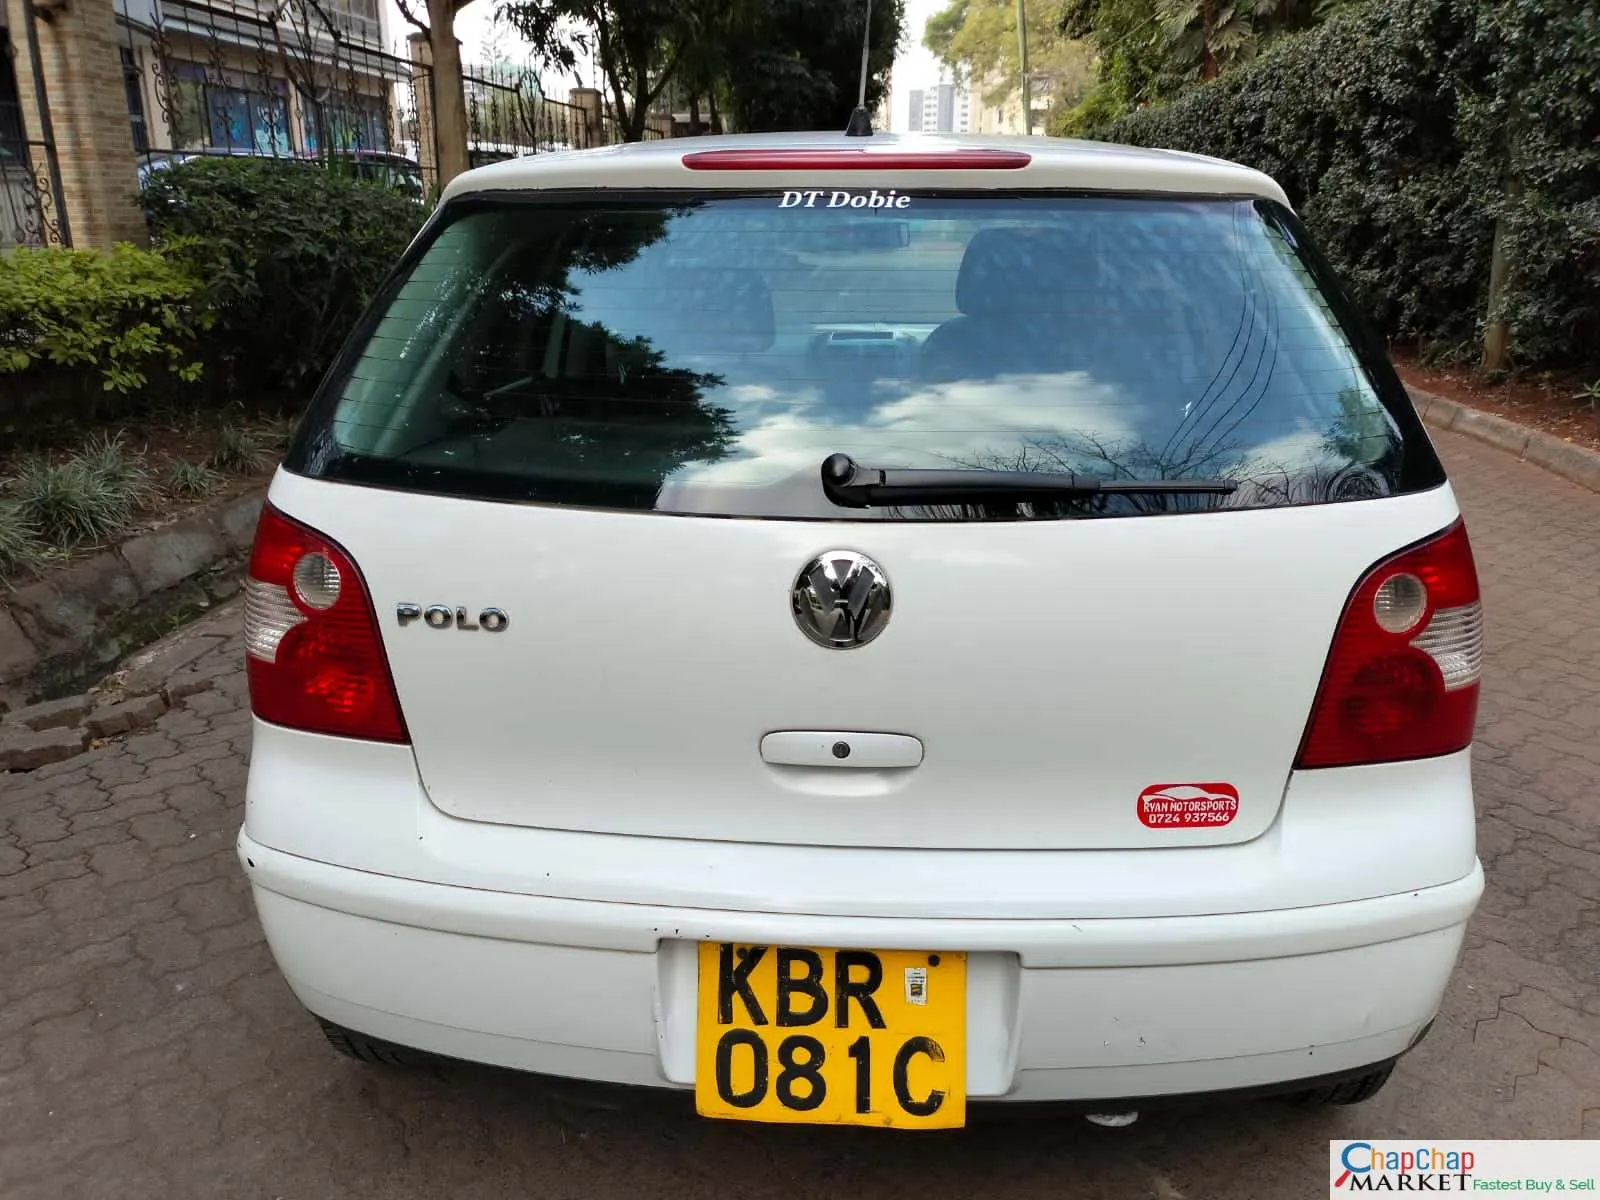 Volkswagen Polo for sale in Kenya QUICK SALE You Pay 30% Deposit Trade in Ok EXCLUSIVE (SOLD)